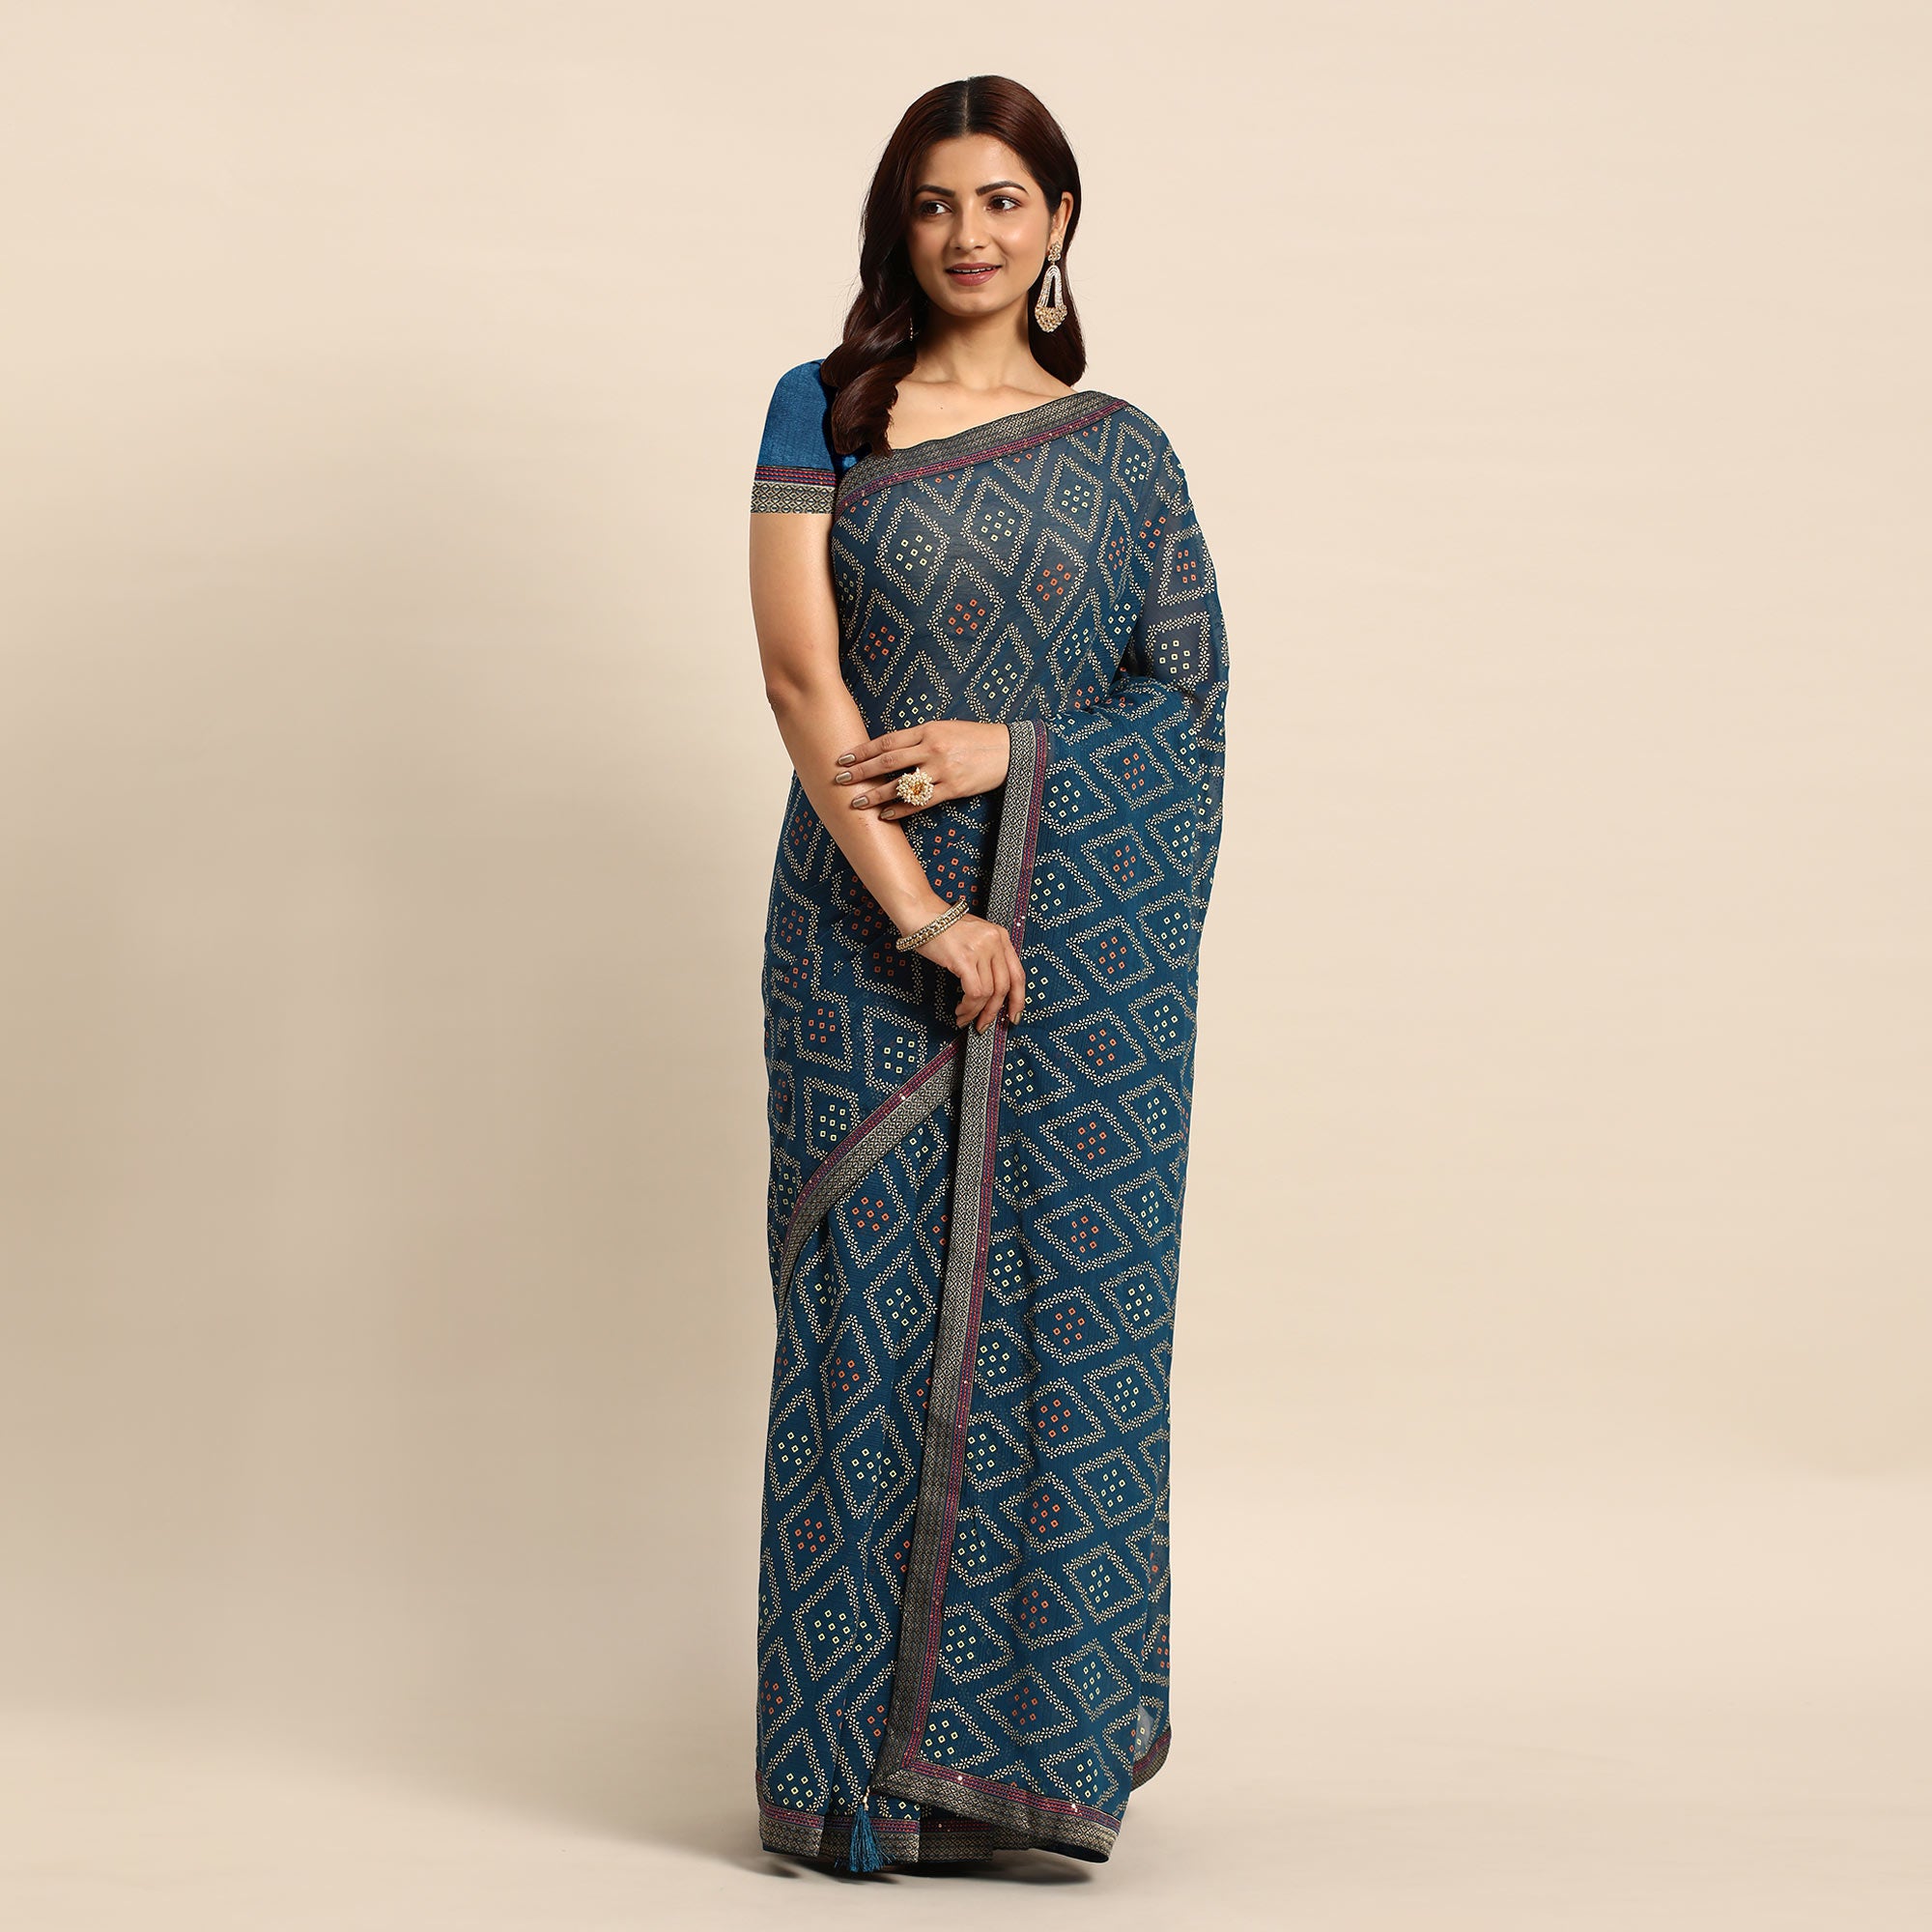 Teal Blue Floral Foil Printed Chiffon Saree With Tassels